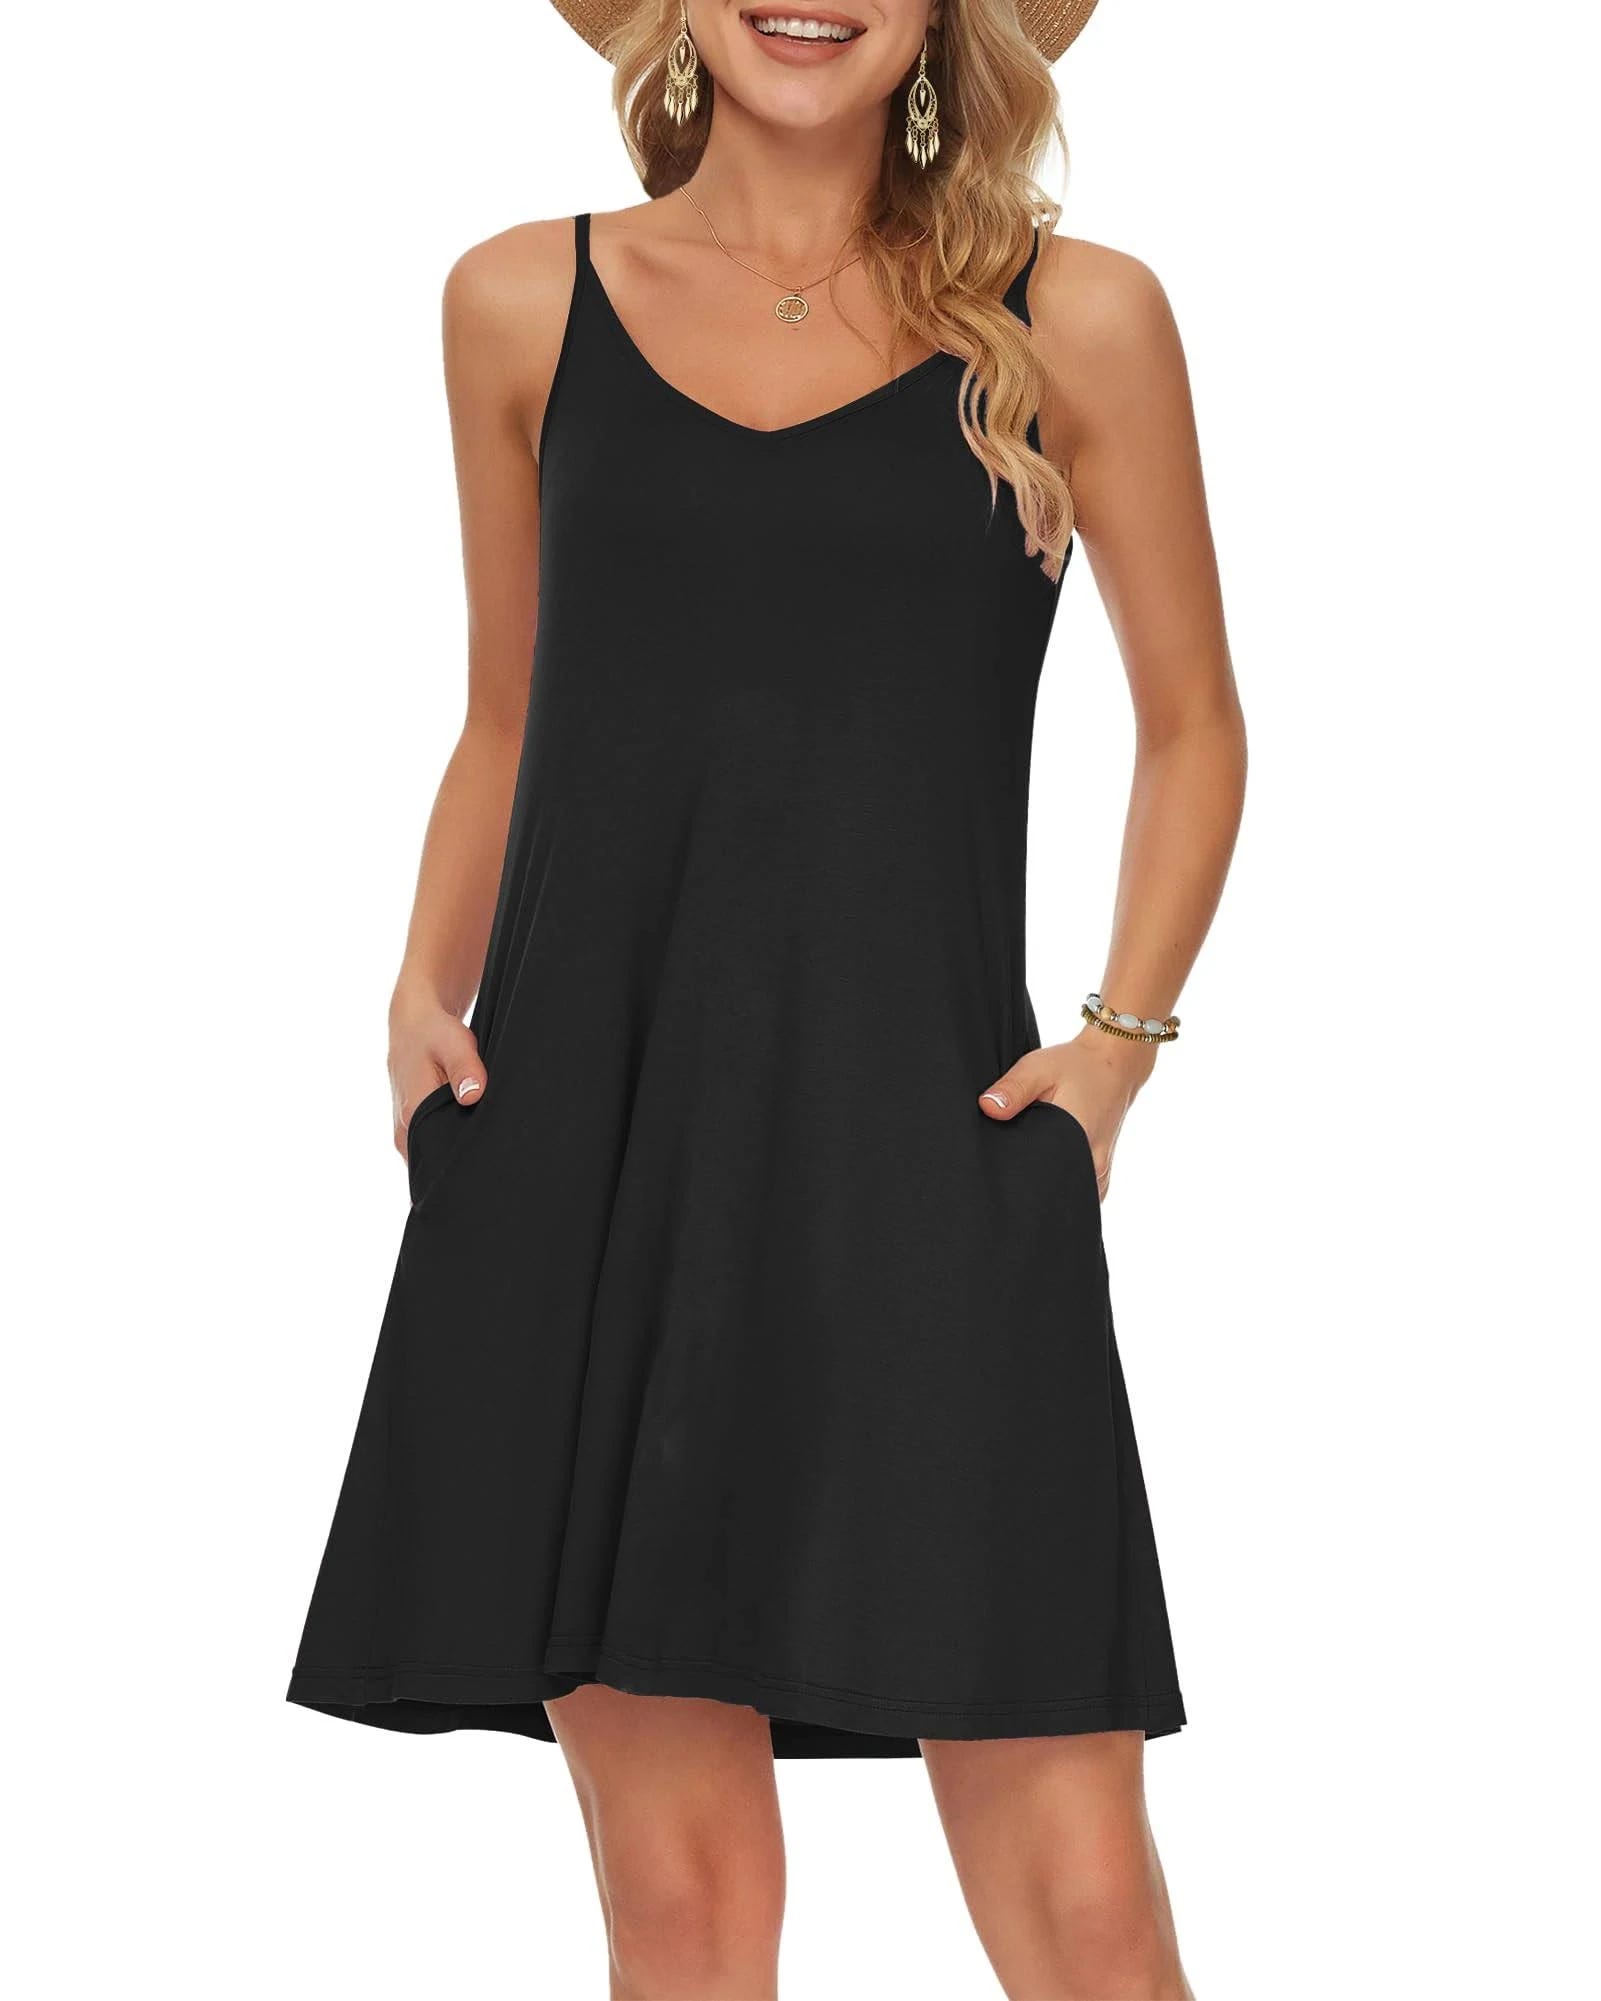 Stylish, Lightweight Black Sleeveless Dress for Casual Occasions | Image